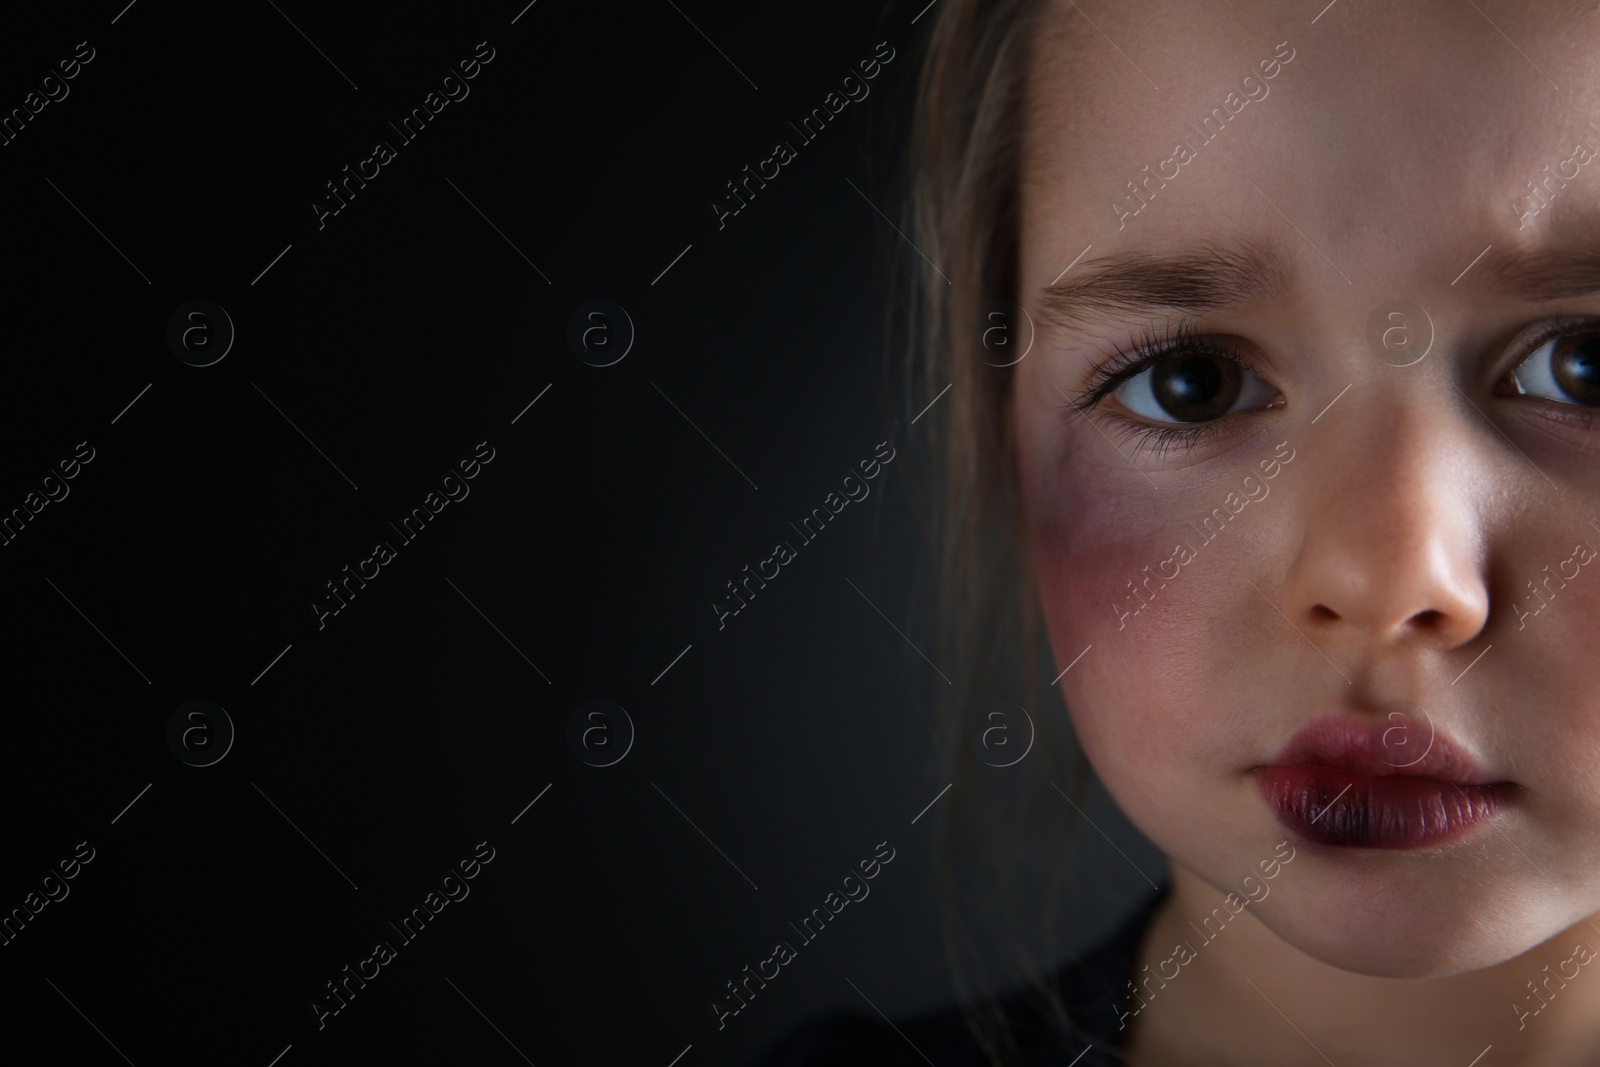 Closeup view of little girl with bruises on face against dark ...